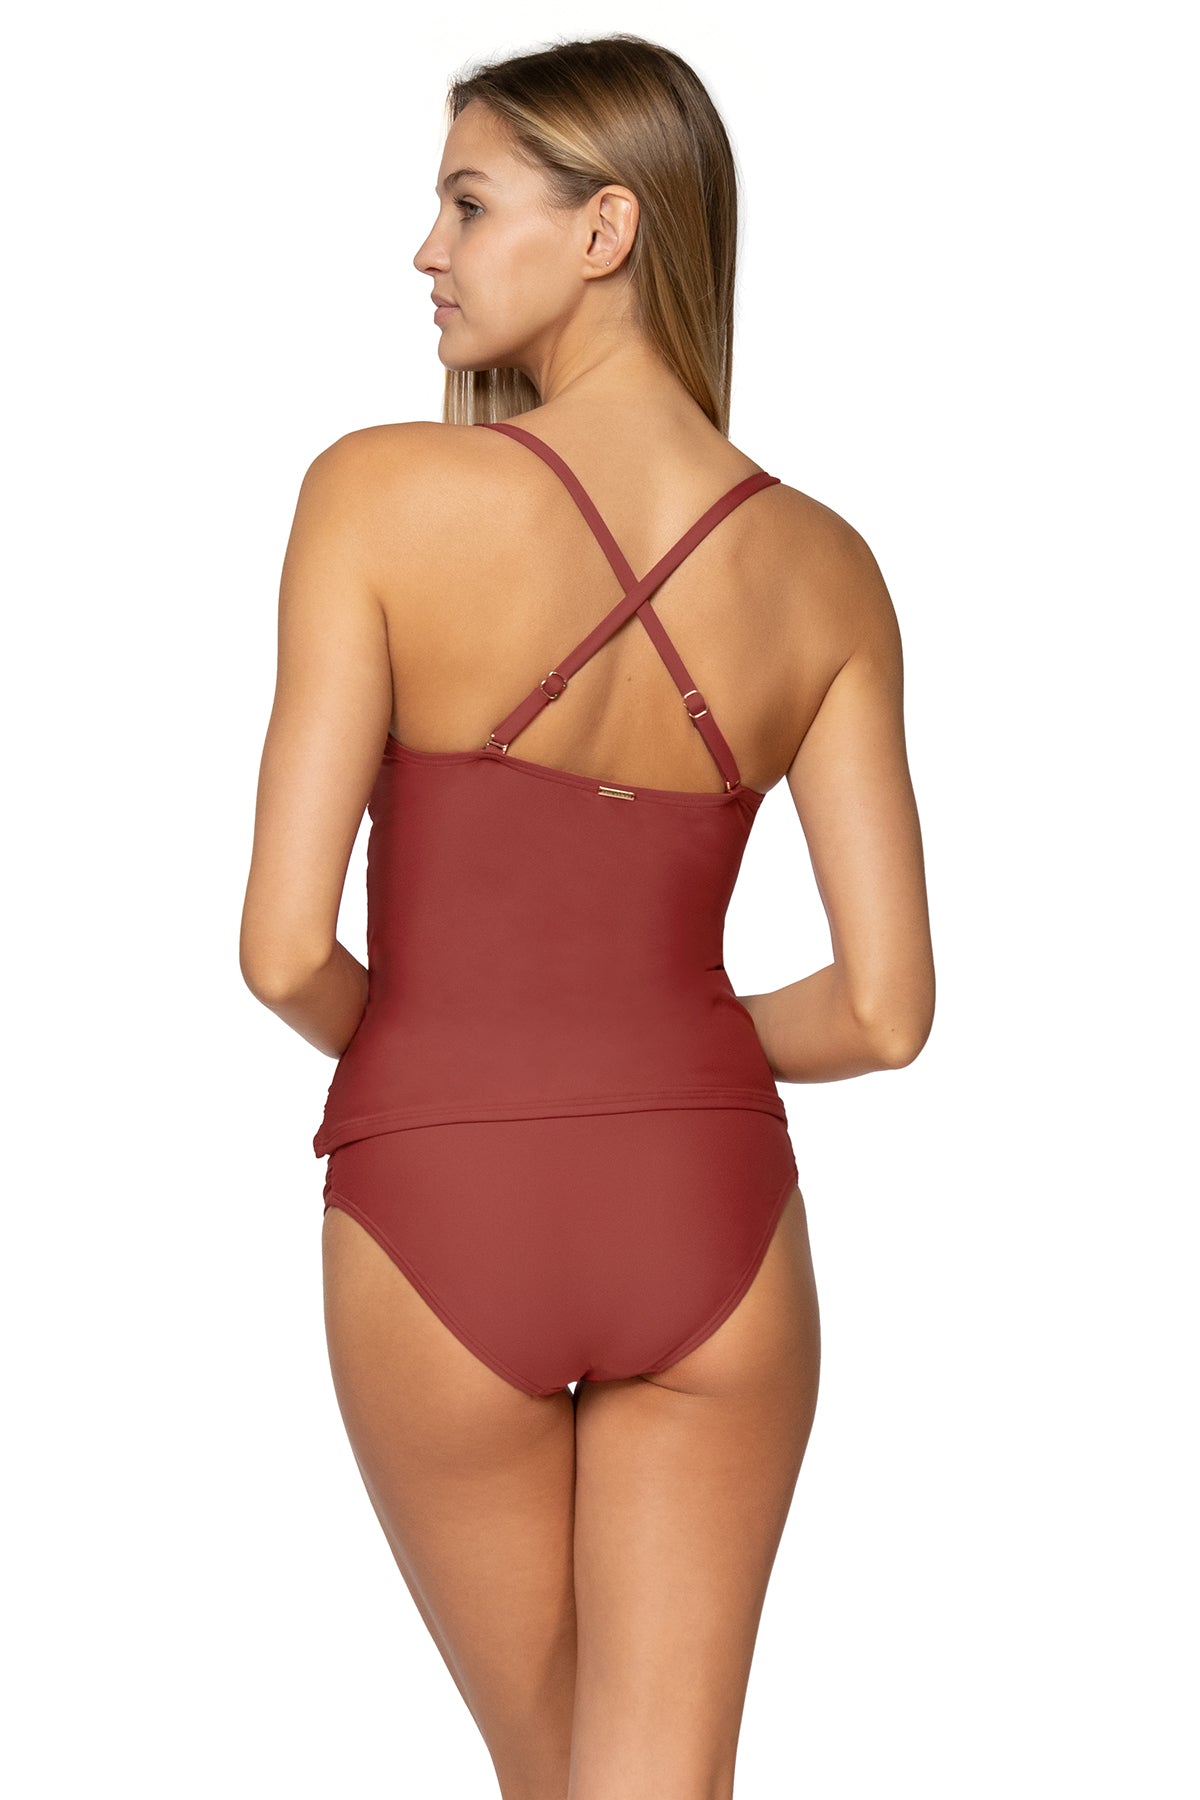 Back view of Sunsets Tuscan Red Simone Tankini swim top showing crossback straps with Tuscan Red Femme Fatale Hipster bikini